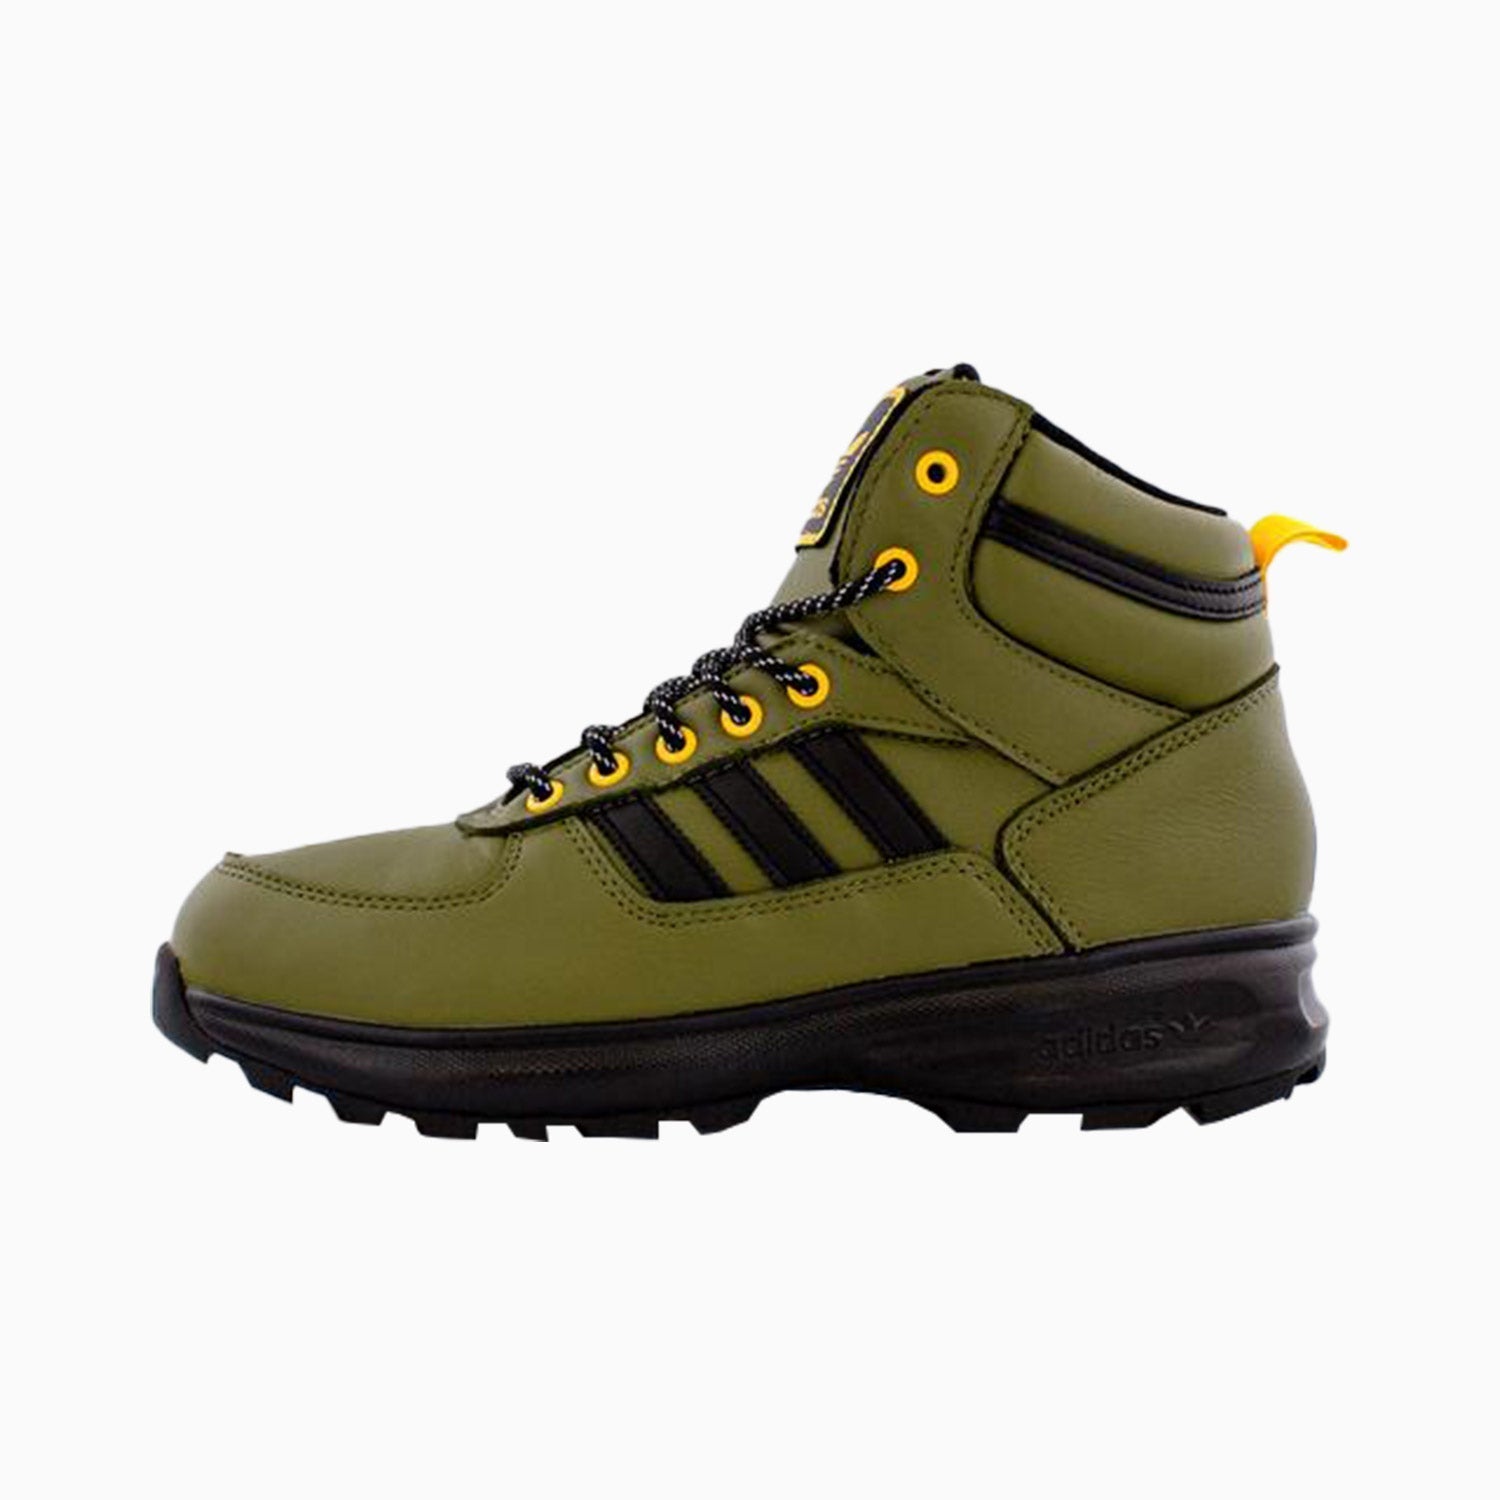 adidas-mens-chasker-boot-gy1198